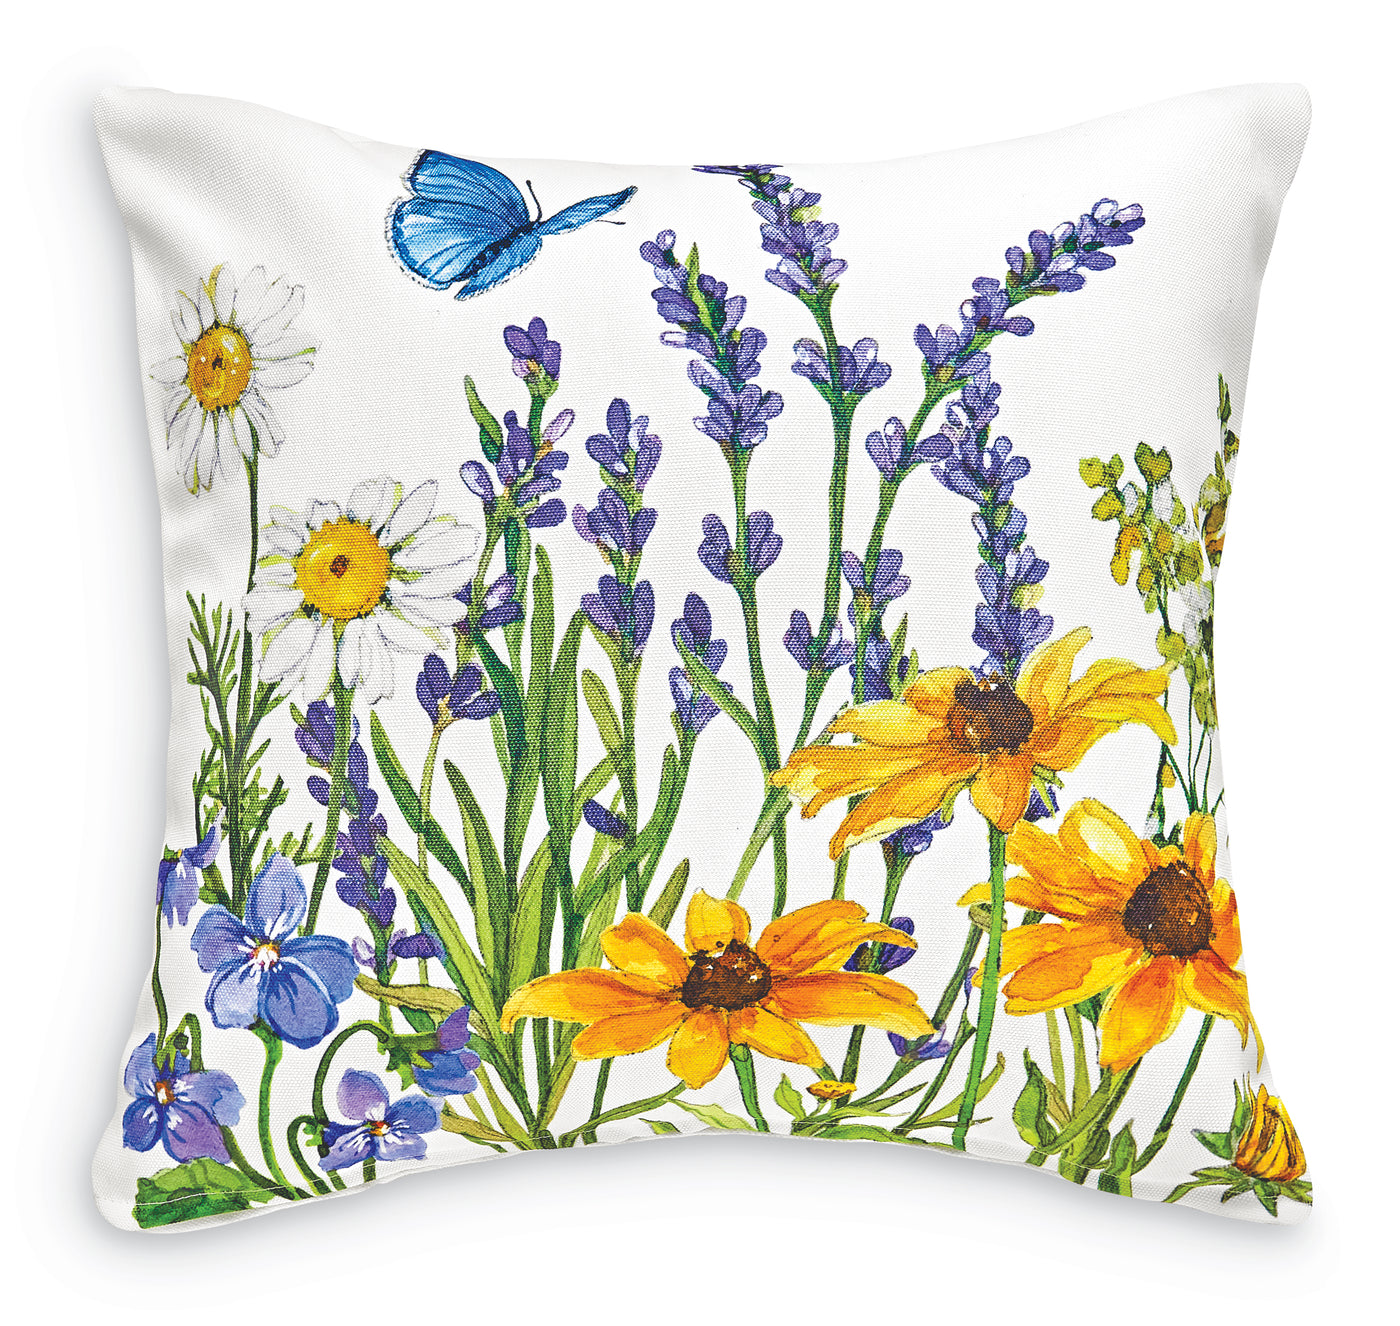 Wildflowers and Butterflies Pillow I